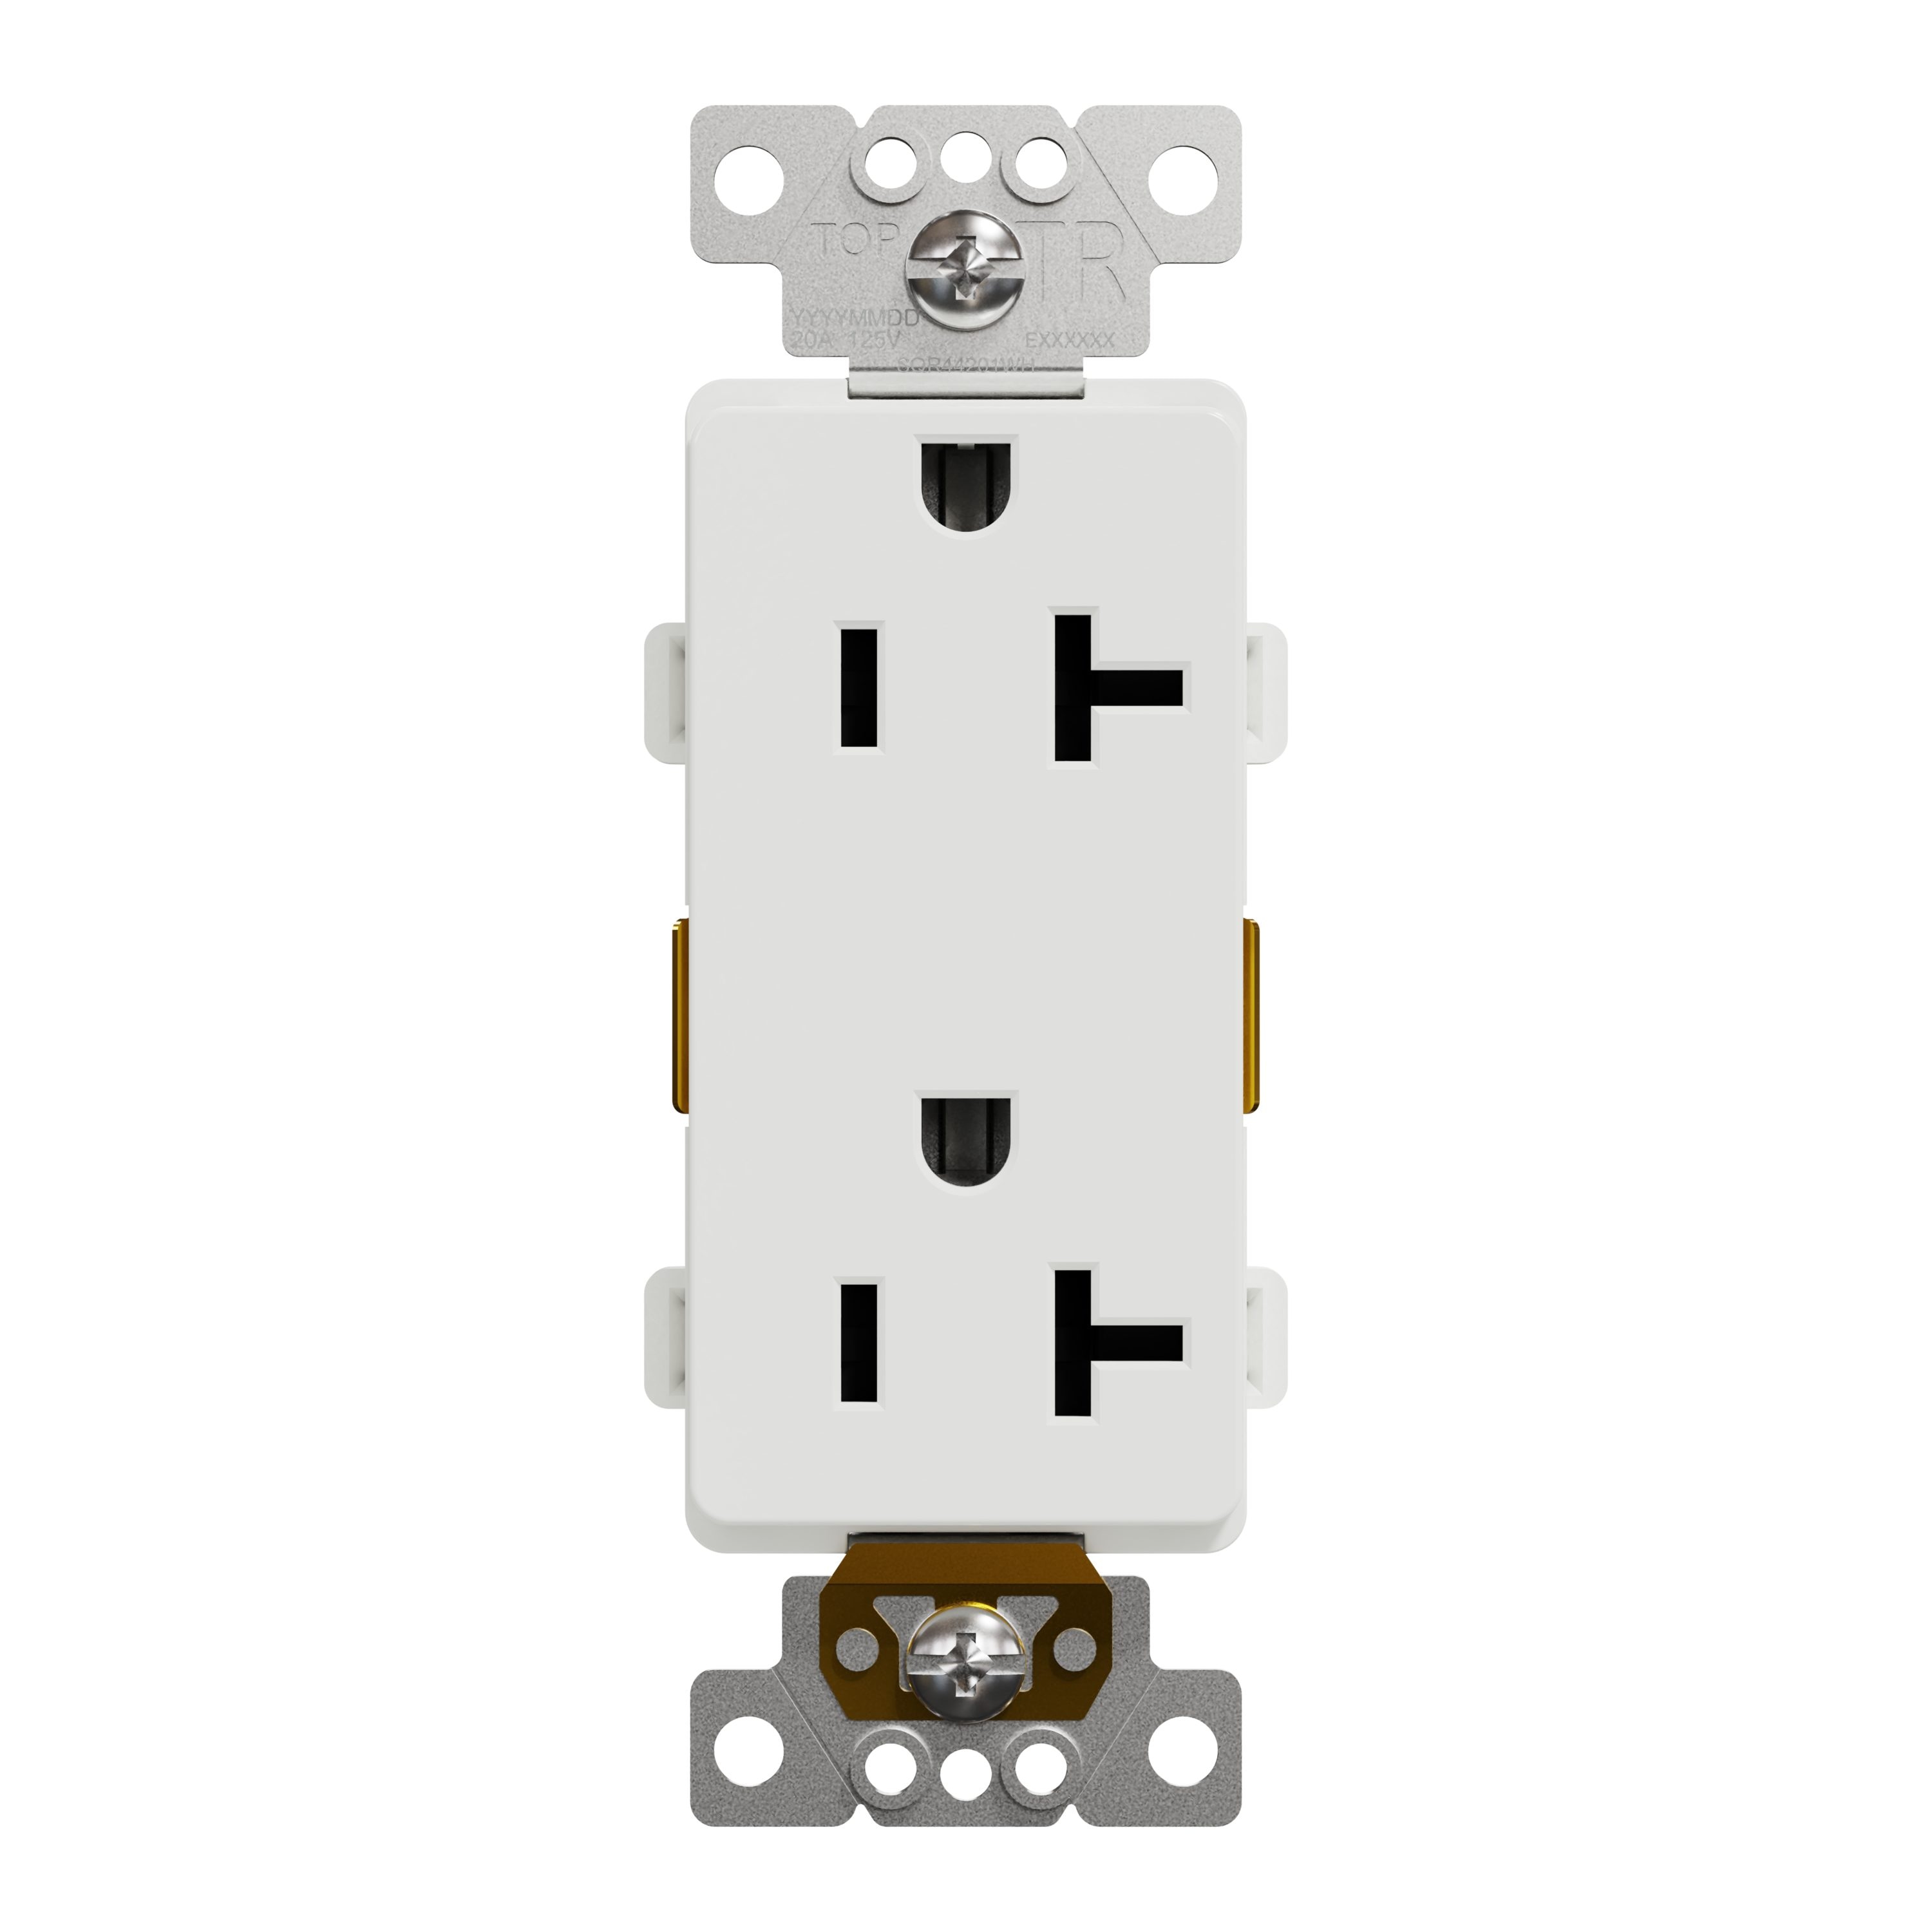 Cordinate Grounded Outlet On/Off Power Switch, 3 Prong, Plug in Adapter,  Easy to Install, for Indoor Lights and Small Appliances, Energy Saving,  Grey